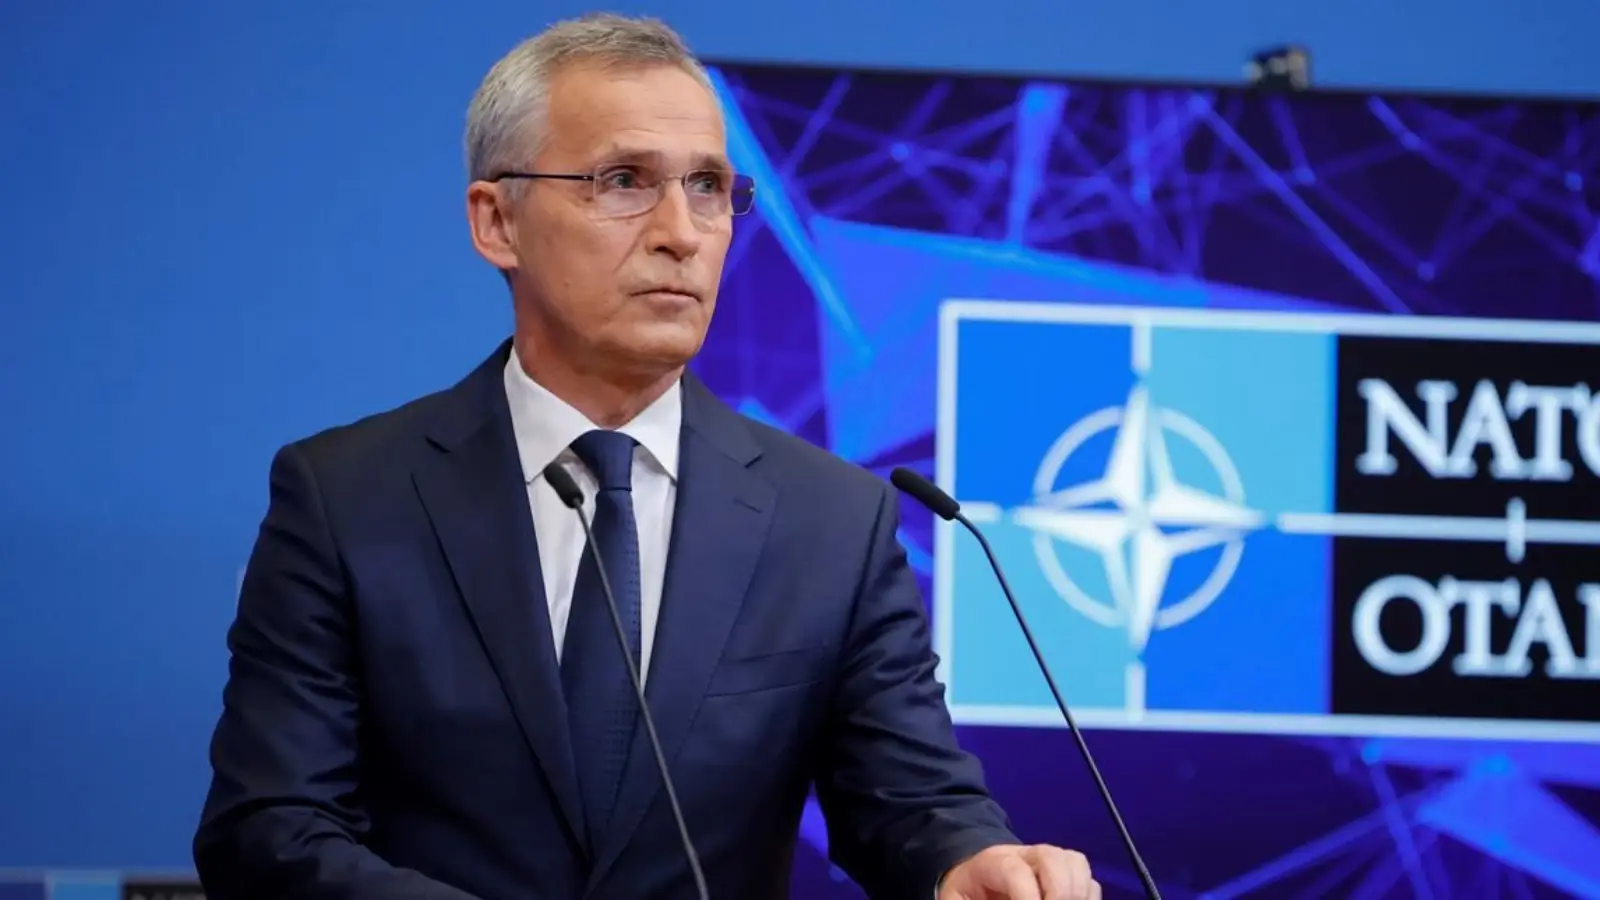 NATO Sends Worrying Announcement War Including Romania